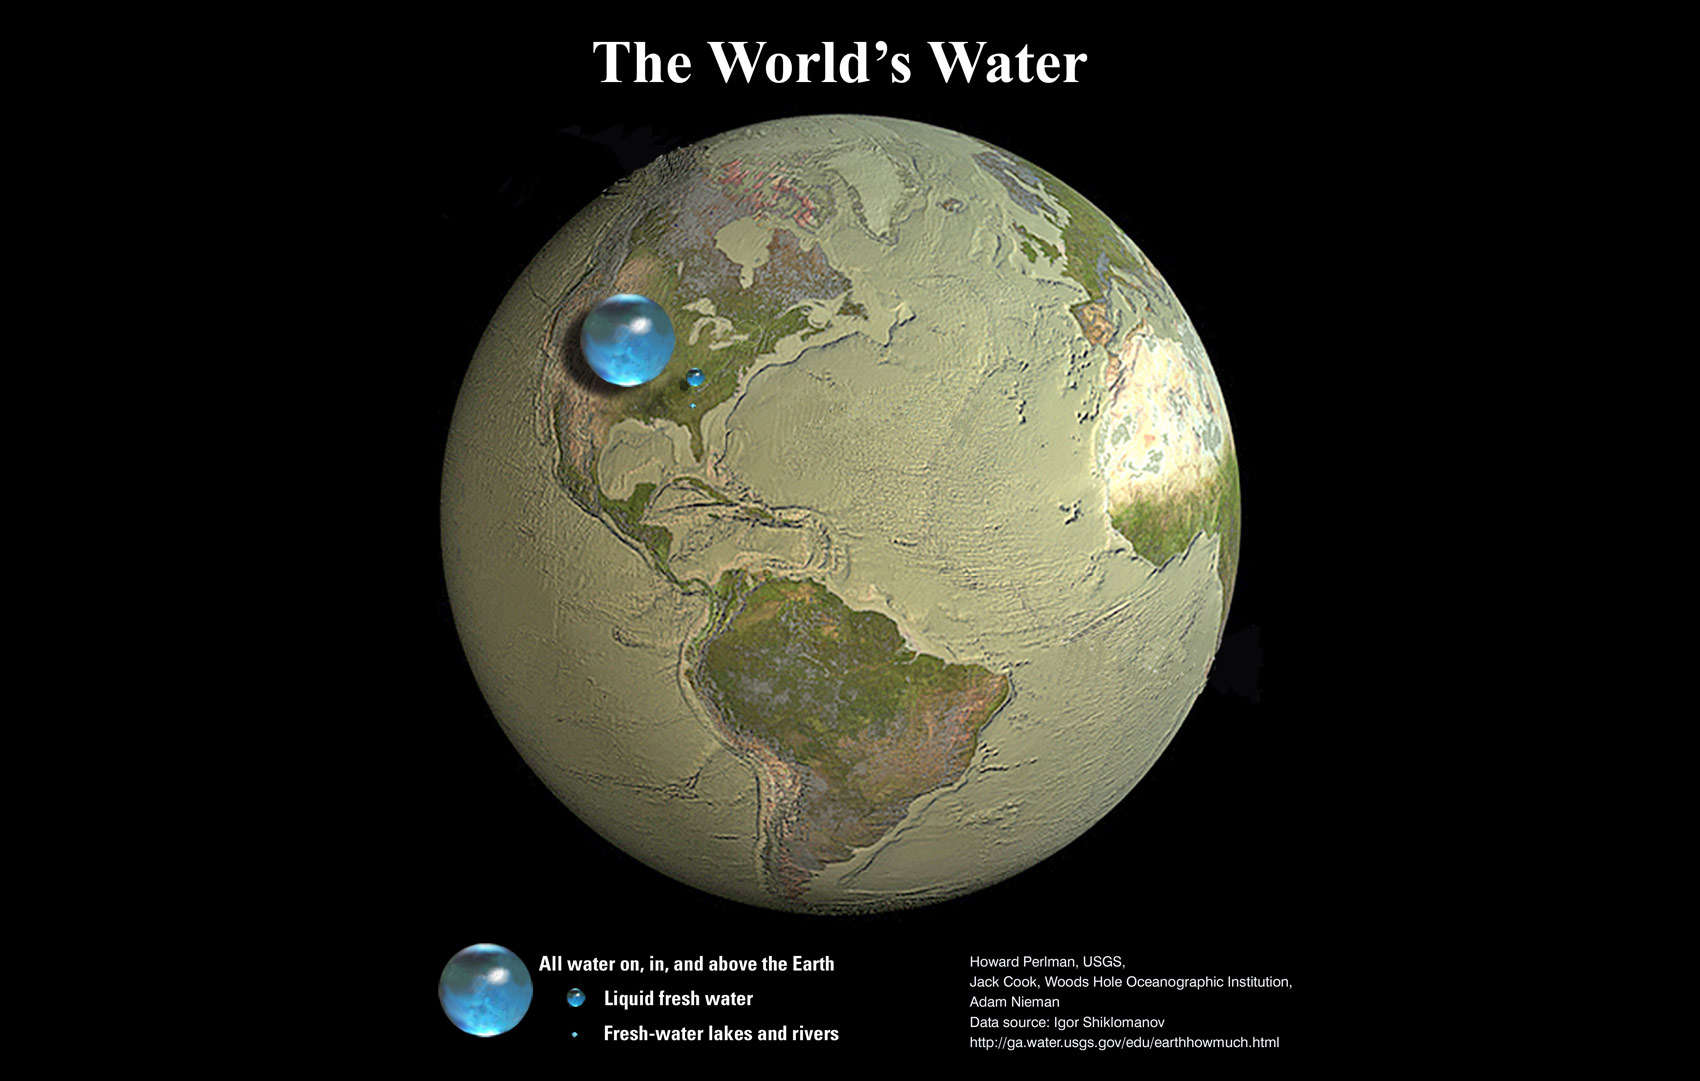 Art depicting the Earth if all the water were gathered up into one enormous drop. Credit: Howard Perlman, Hydrologist, USGS, Jack Cook, Woods Hole Oceanographic Institution, Adam Nieman, Igor Shiklamonov